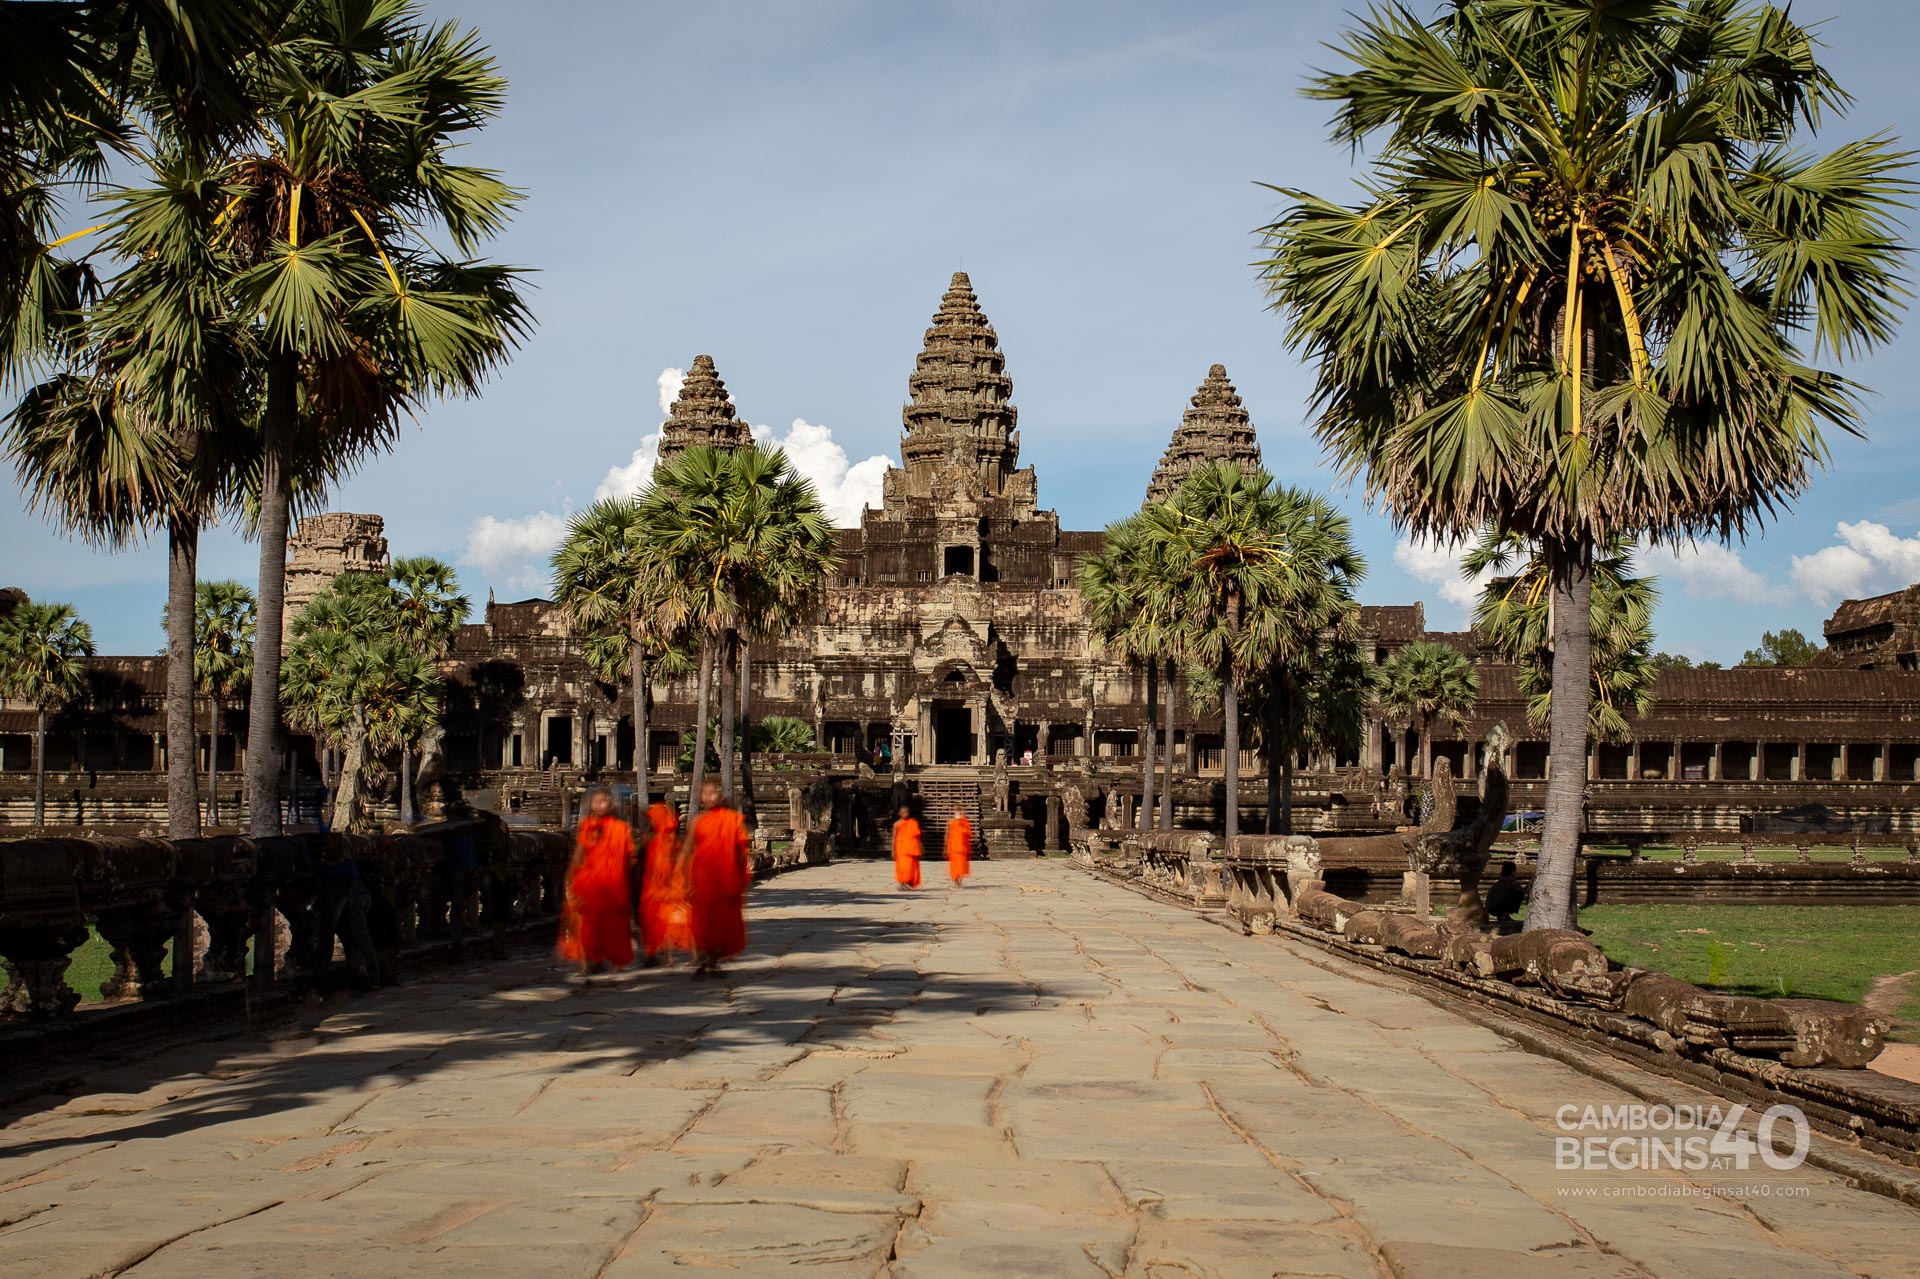 Holiday in Cambodia: 10 Must-See Attractions and Activities